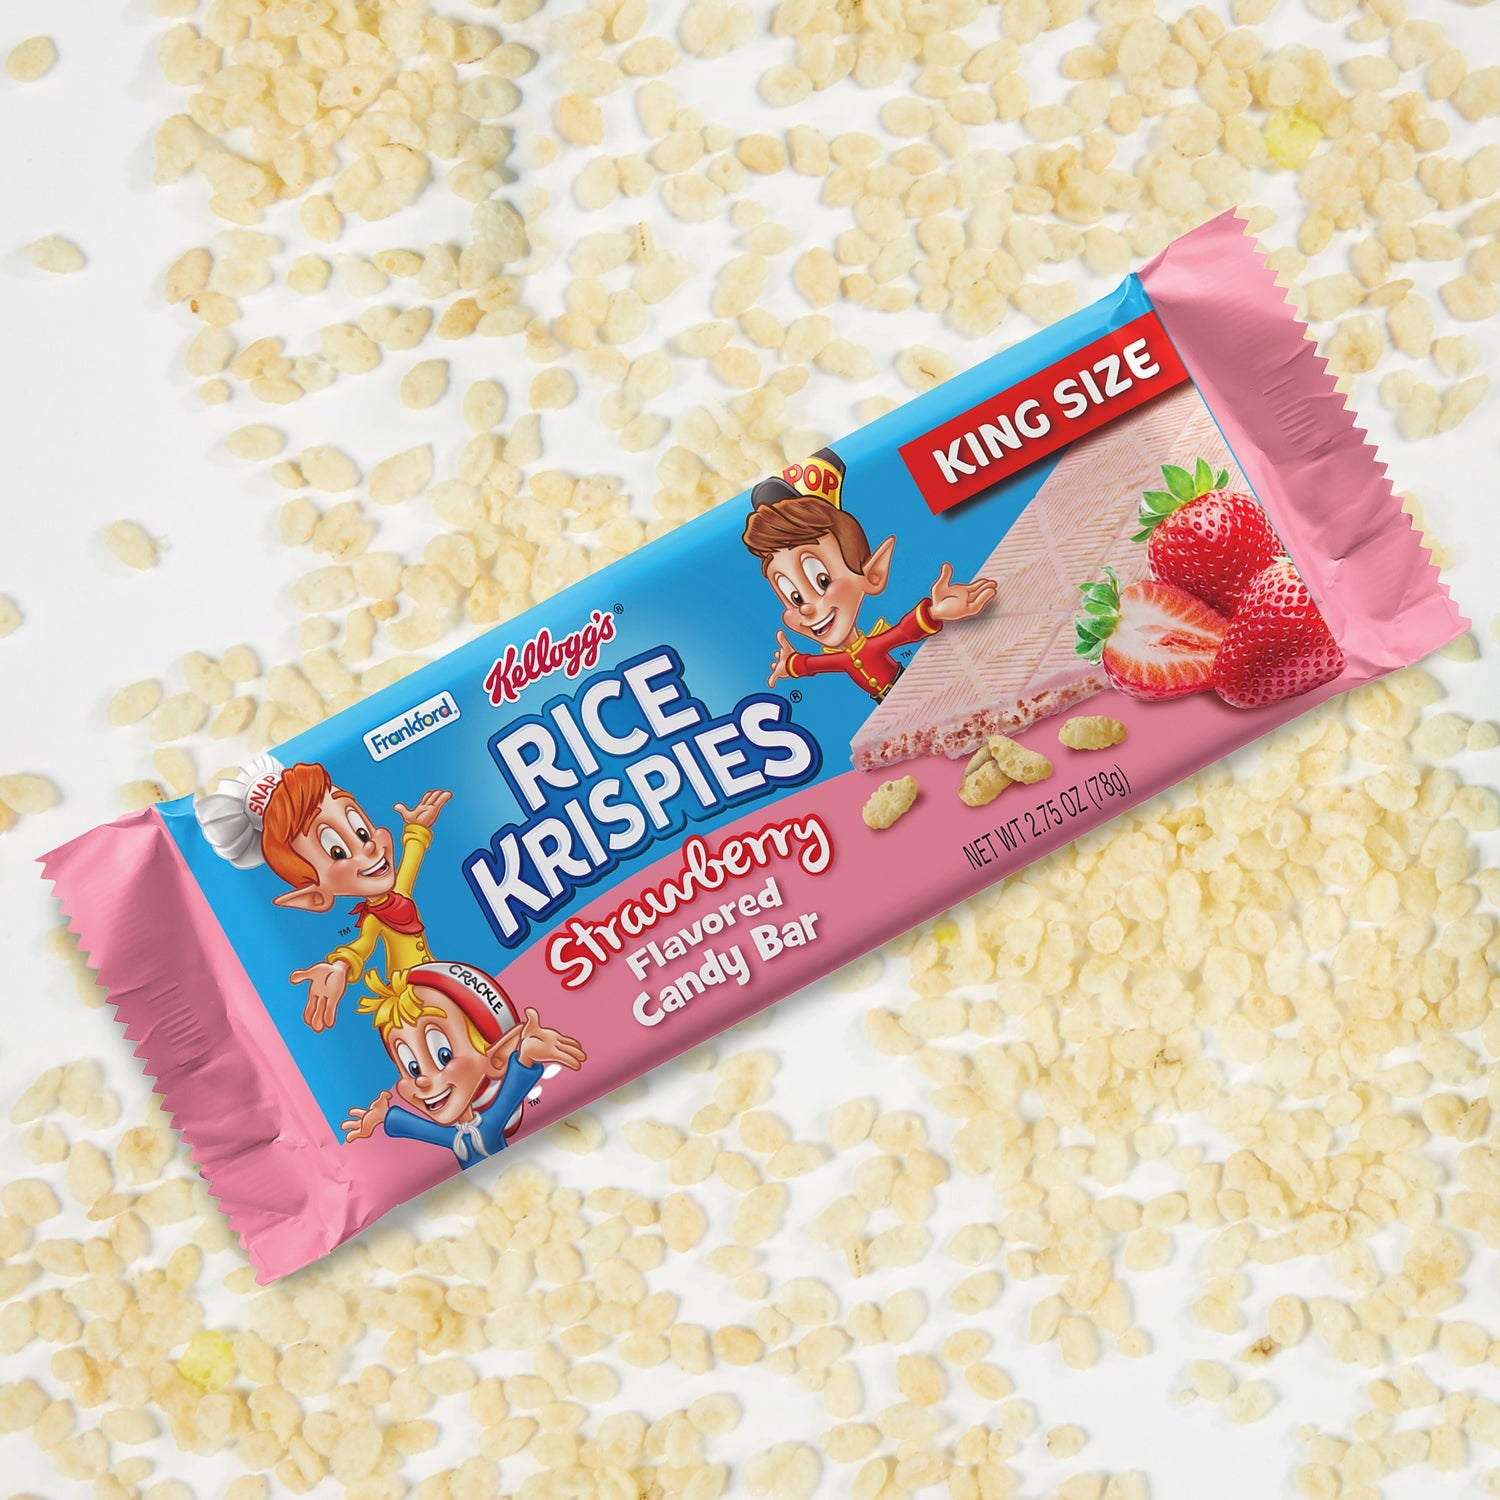 Blue and pink candy bar wrapper surrounded by rice krispies cereal